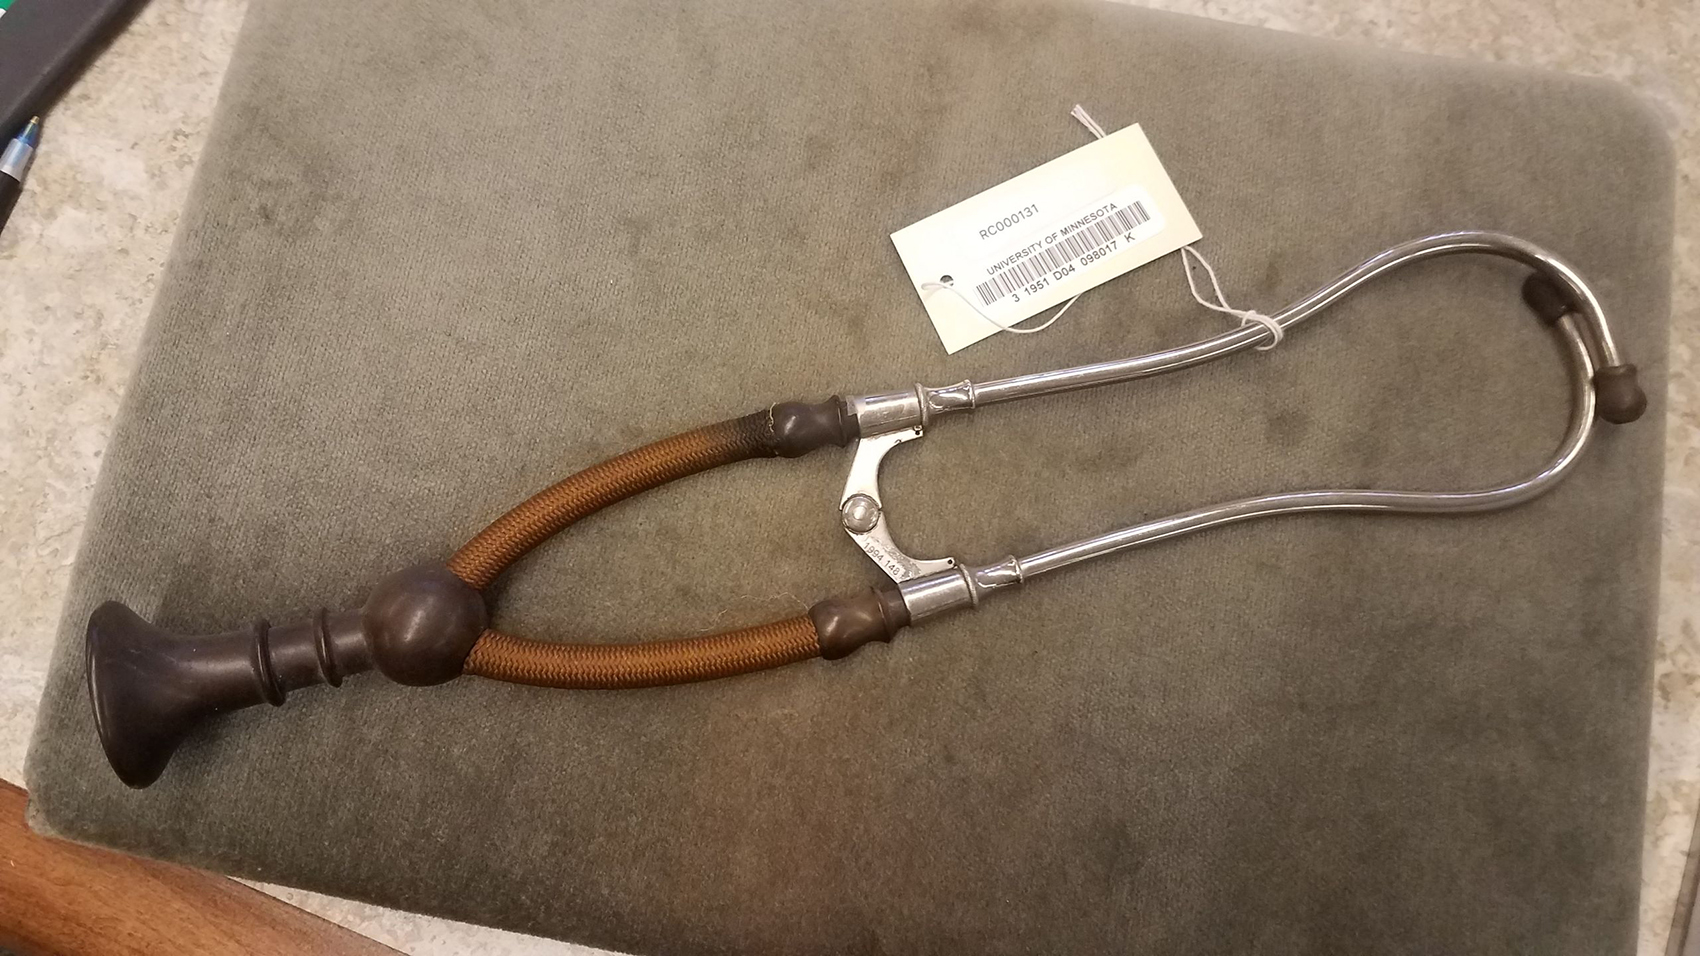 Early 1900s model of a binaural (two-ear-piece) stethoscope, made of rubber, nylon, metal, and bronze from the Wangensteen Historical Library.